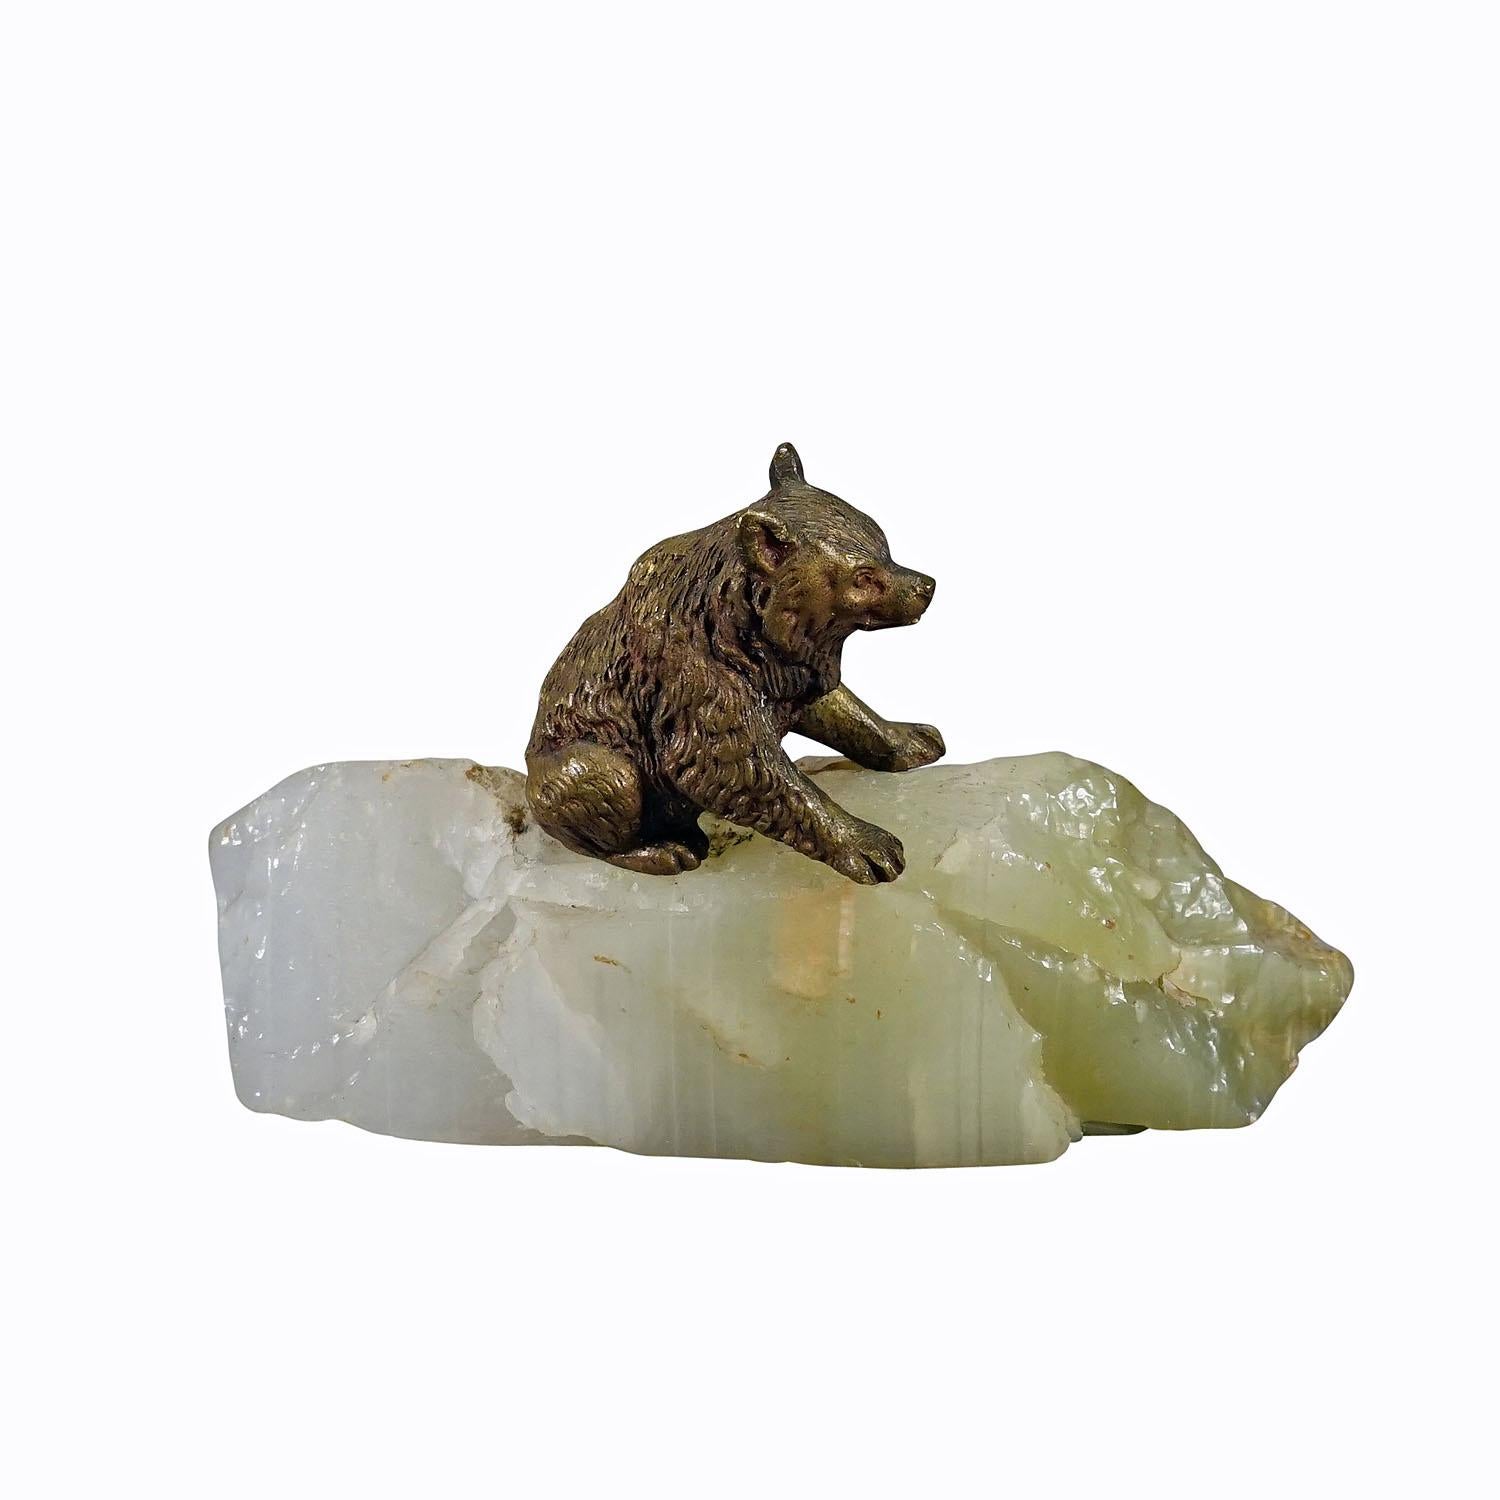 Antique Vienna Bronce Bear on a Crystal Rock
Item e7254
A beautiful small bronze statue of a wandering bear mounted on a crystal rock. A magnificent, realistic example of the famous Vienna bronze statues from the early 20th century.

artfour is an